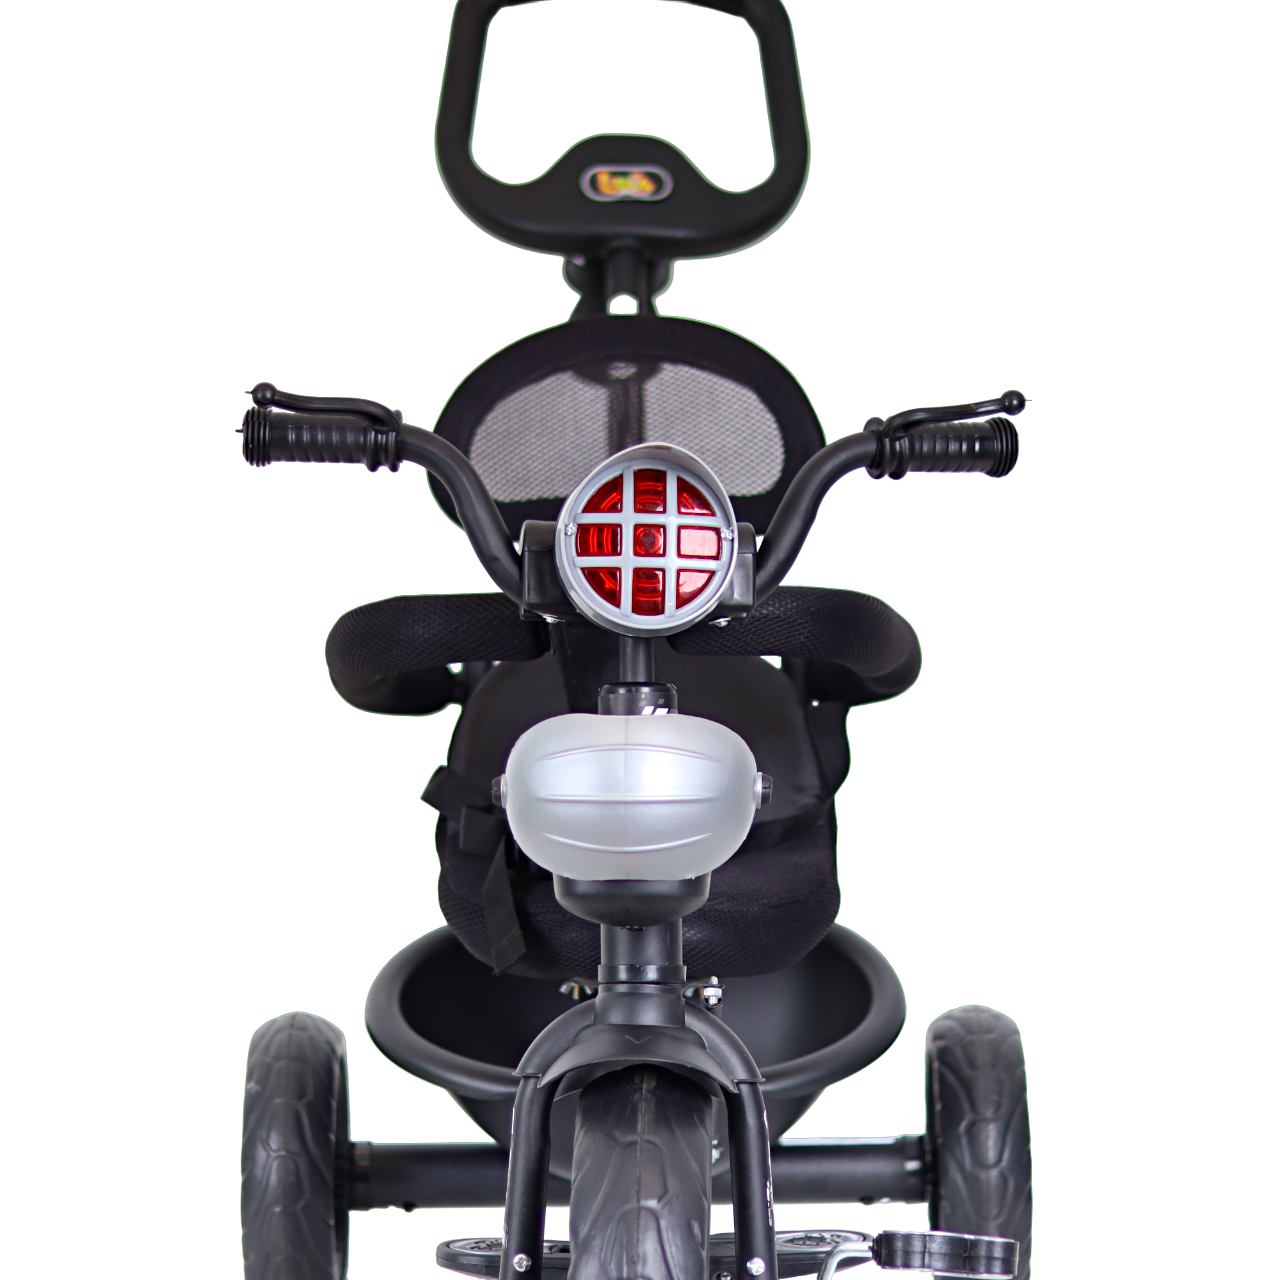 Luusa R9 Power Musical Tricycle for Kids - Hoodless Version Of Baby Cycle-Black